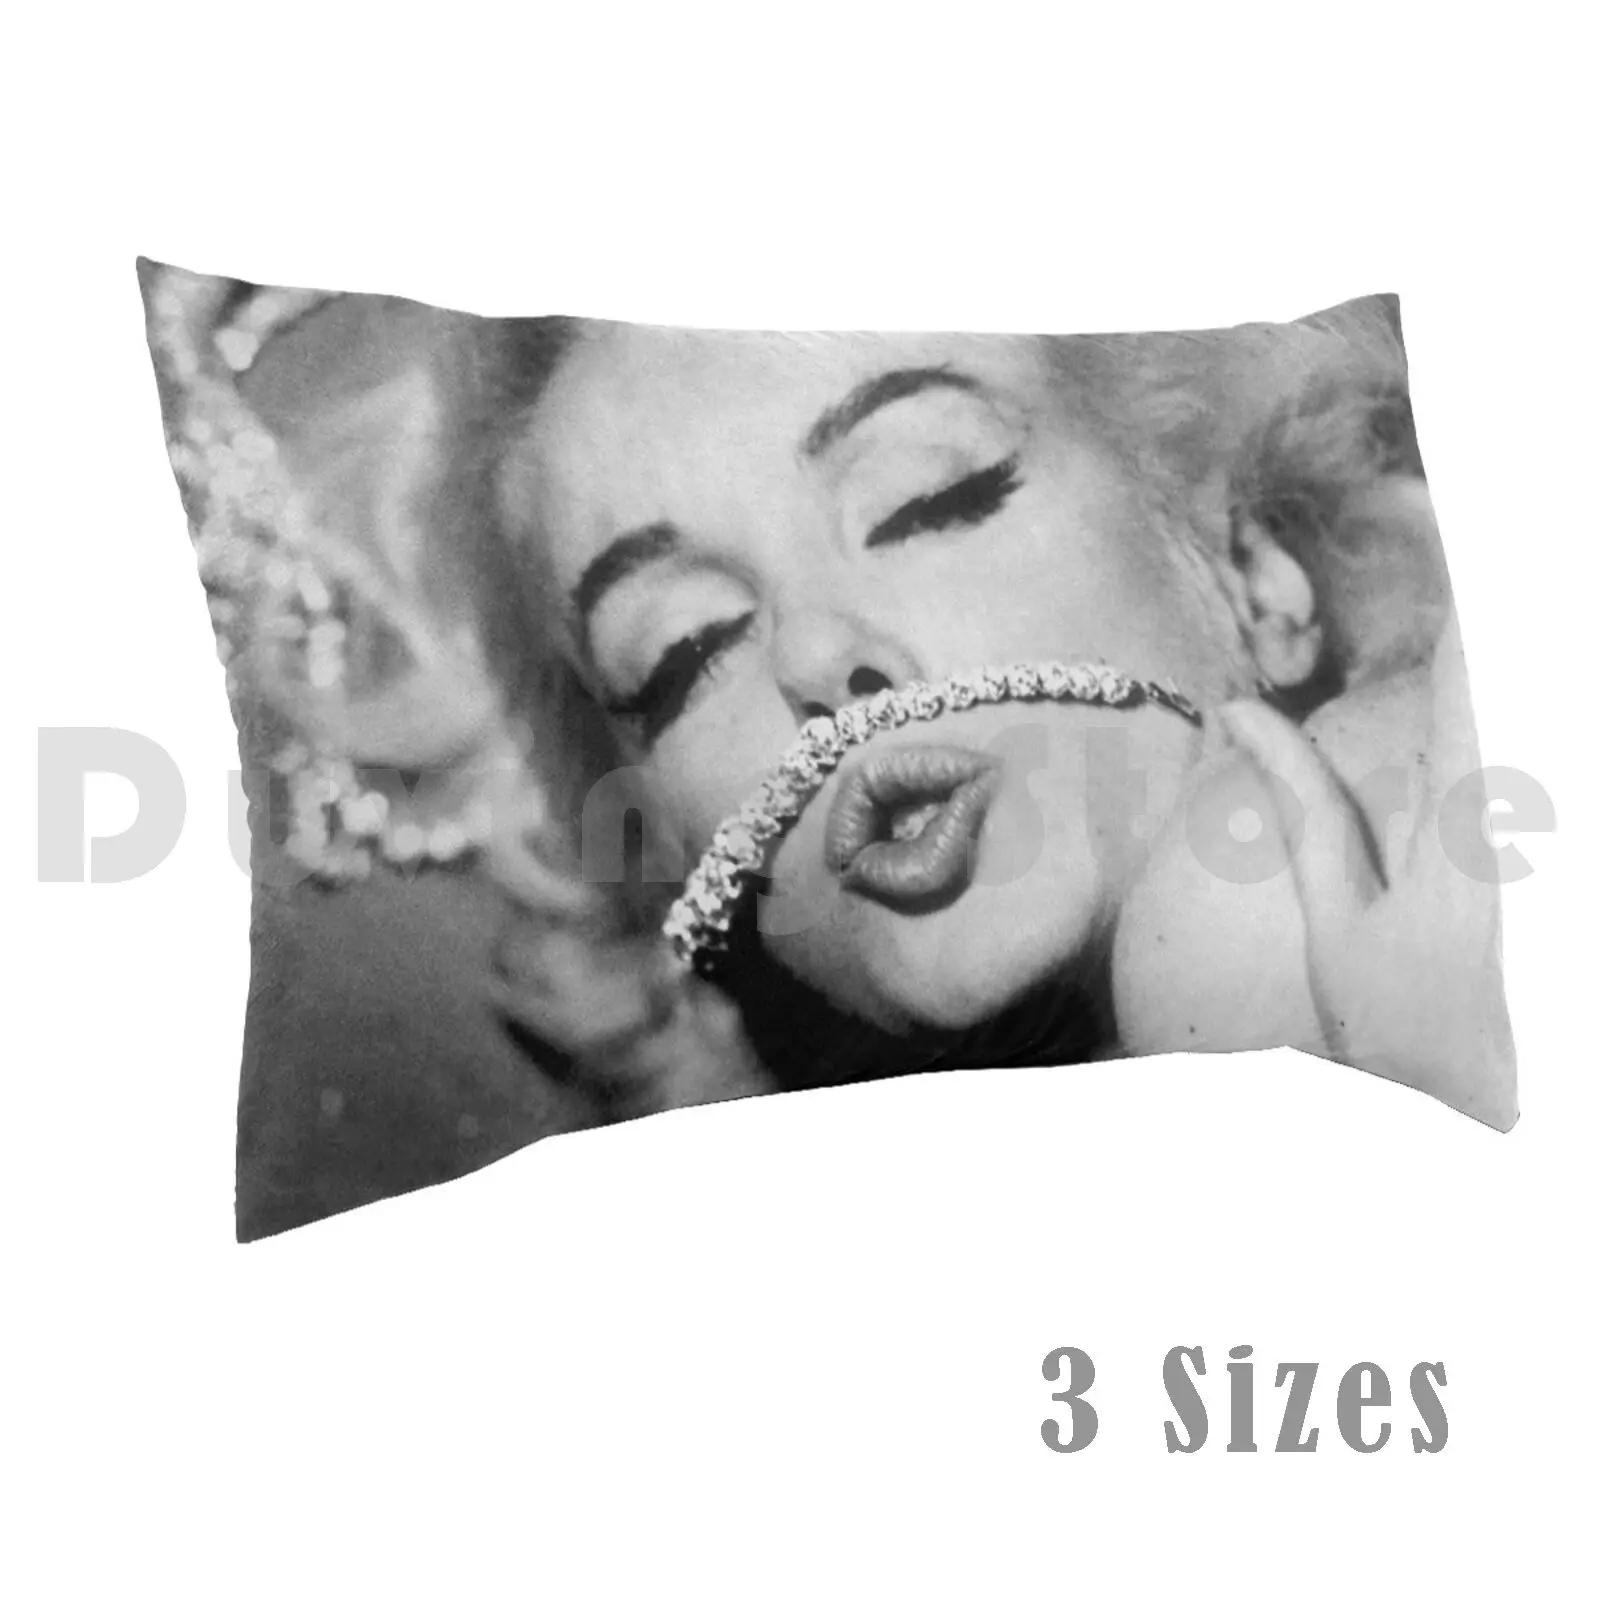 

Marilyn Monroe Vintage Diamonds Are A Girls Best Friend Retro Black And White 1950s Pillow Case Printed 50x75